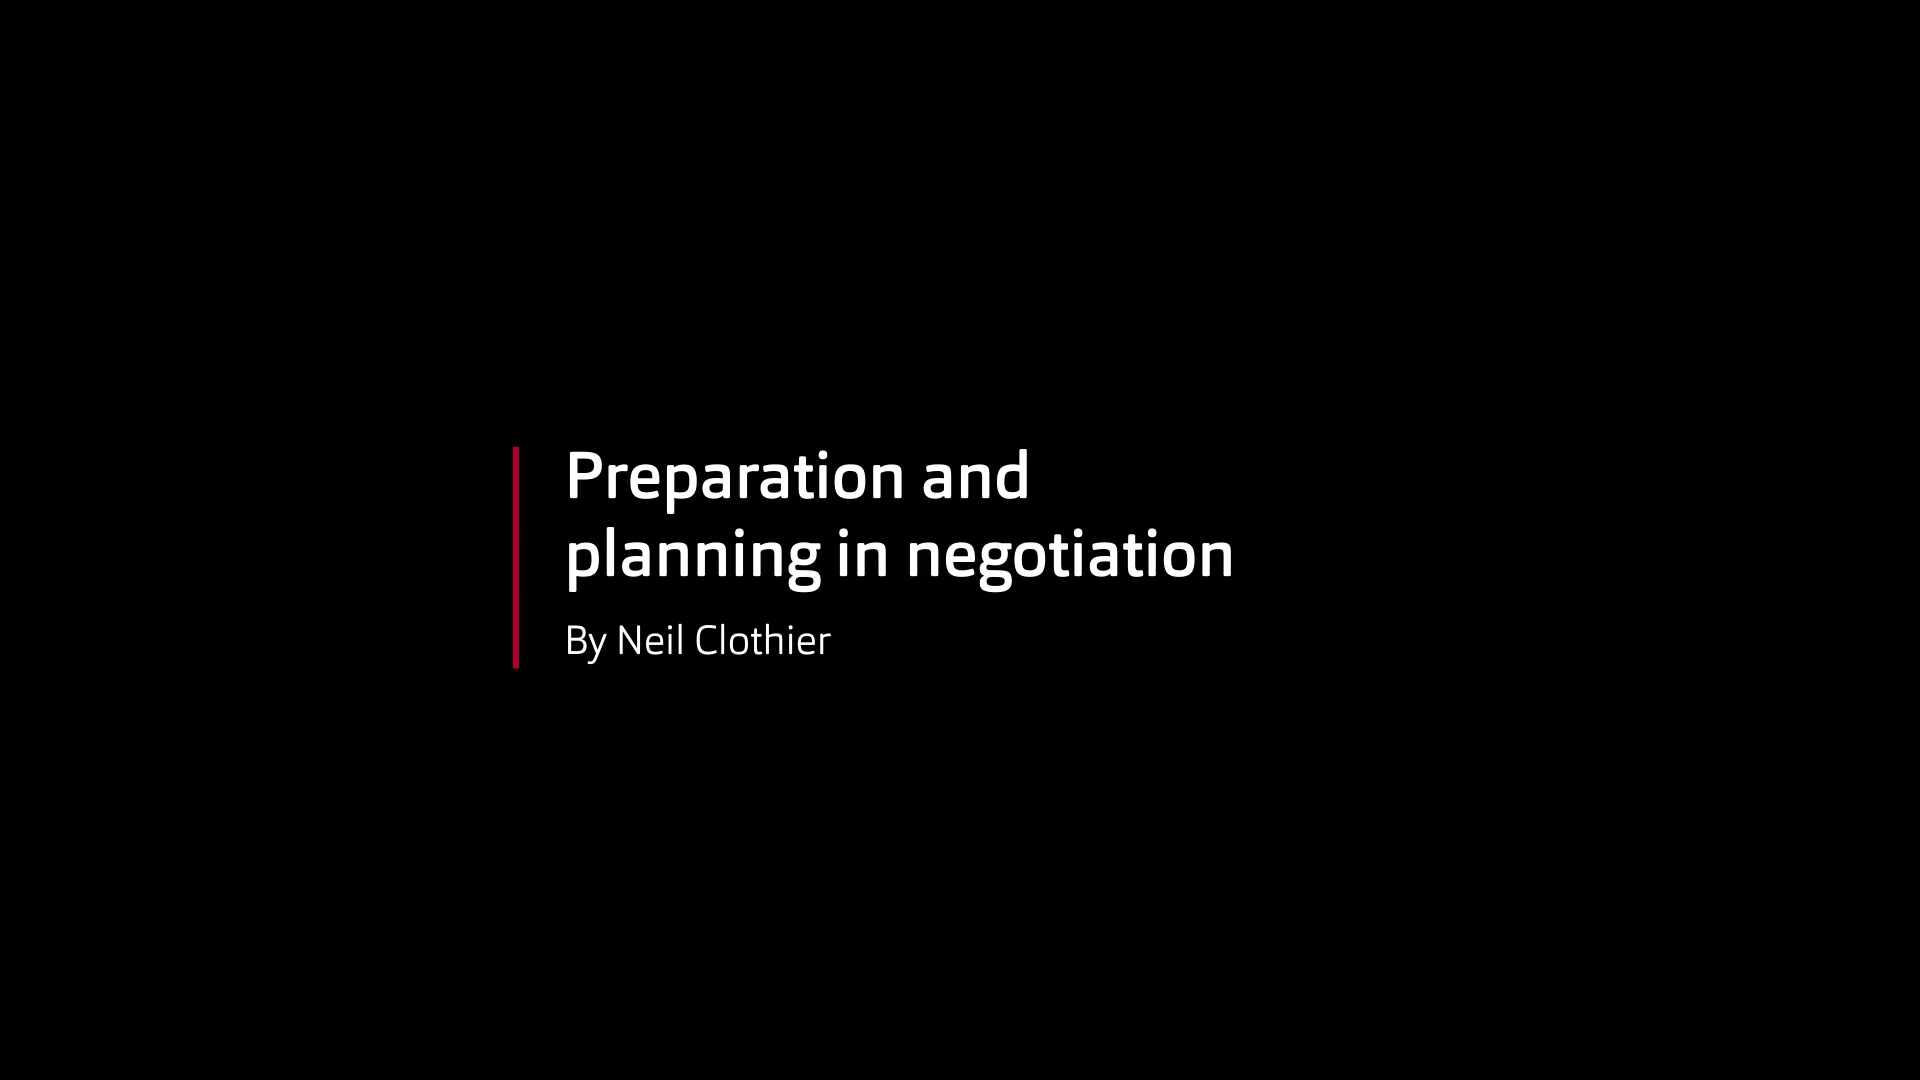 Preparation and planning - Neil Clothier